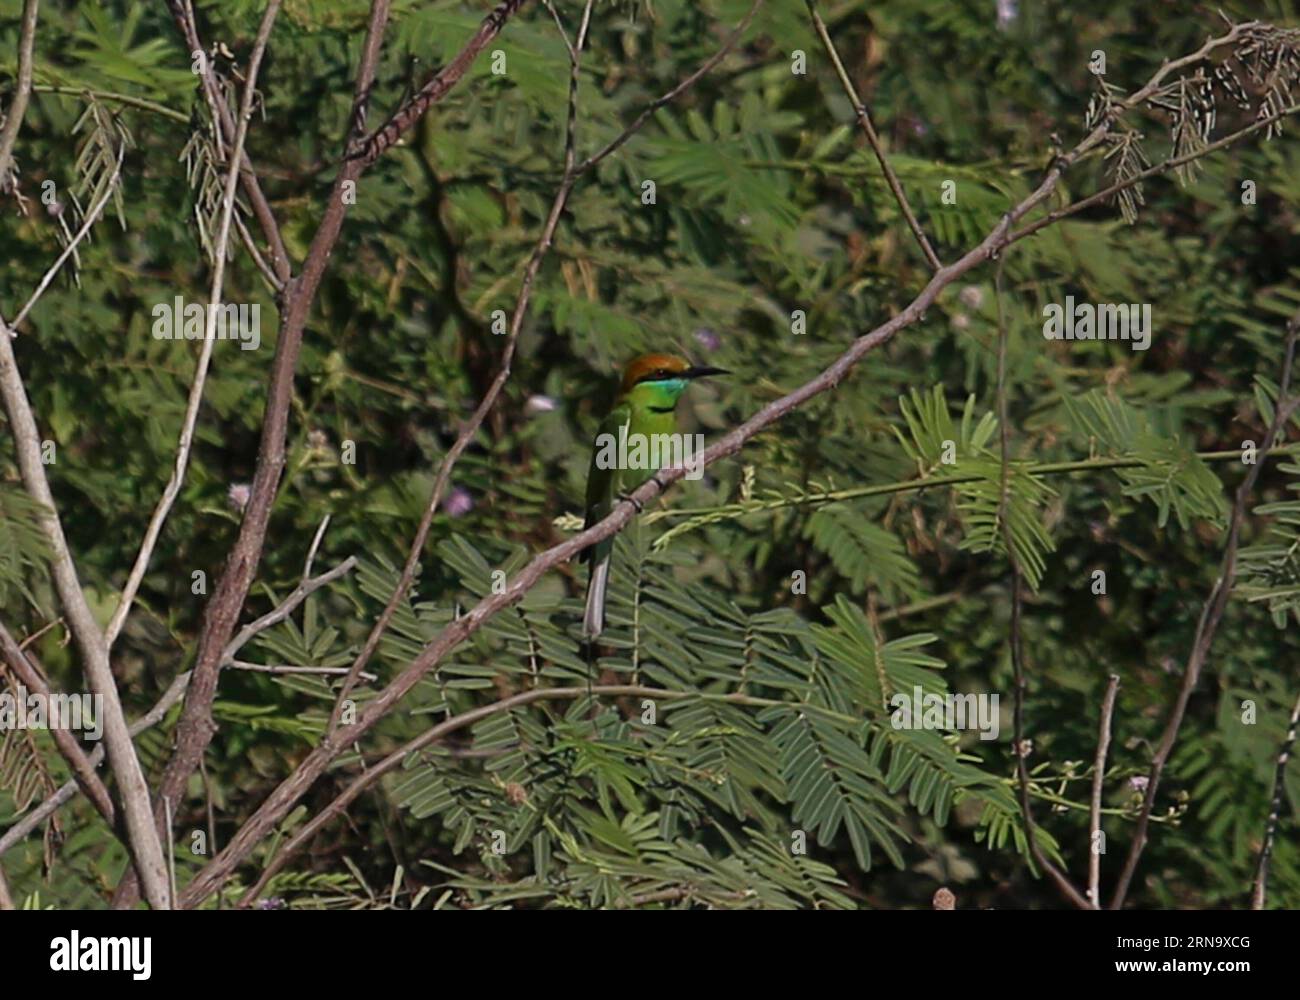 (151223) -- BAGO, Dec. 23, 2015 -- Photo taken on Dec. 23, 2015 shows a little green bee-eater on a branch at Moeyungyi Wetland Wildlife Sanctuary in Bago region, Myanmar. Moeyungyi Wetlands is situated in Bago Division. Every year, millions of birds usually fly from the northern hemisphere to the south along the East-Asian Australian Flyway to escape from winter. They stop to rest and feed in Asia. So the flyway contains a network of wetlands and Moeyungyi is one of which could cooperate to certain migrated as well as domestic birds. ) MYANMAR-BAGO-WETLAND-WILDLIFE UxAung PUBLICATIONxNOTxINxC Stock Photo